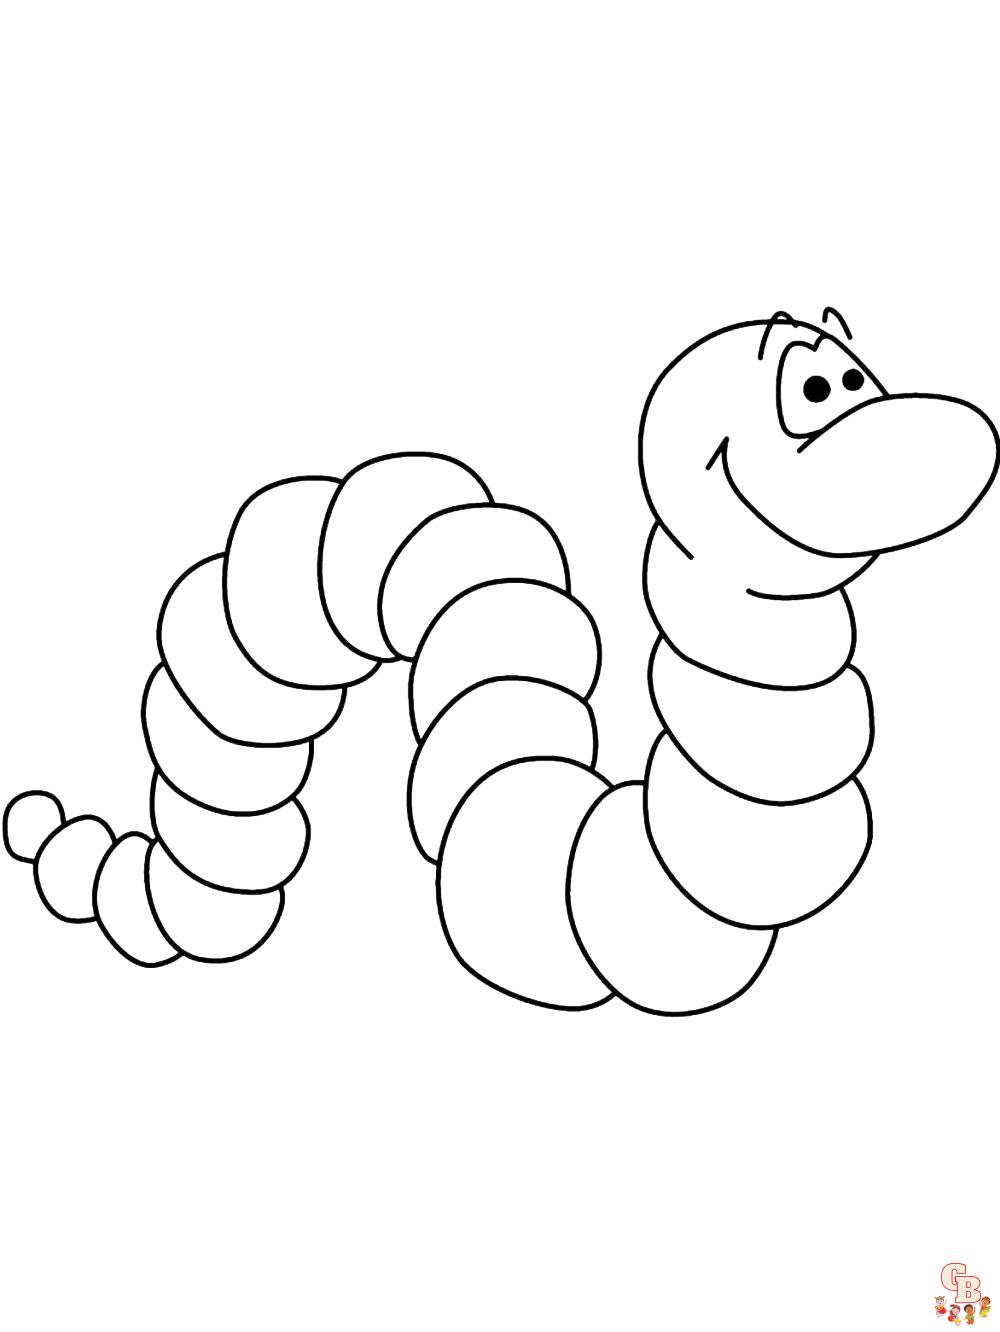 Worm Coloring Pages 14